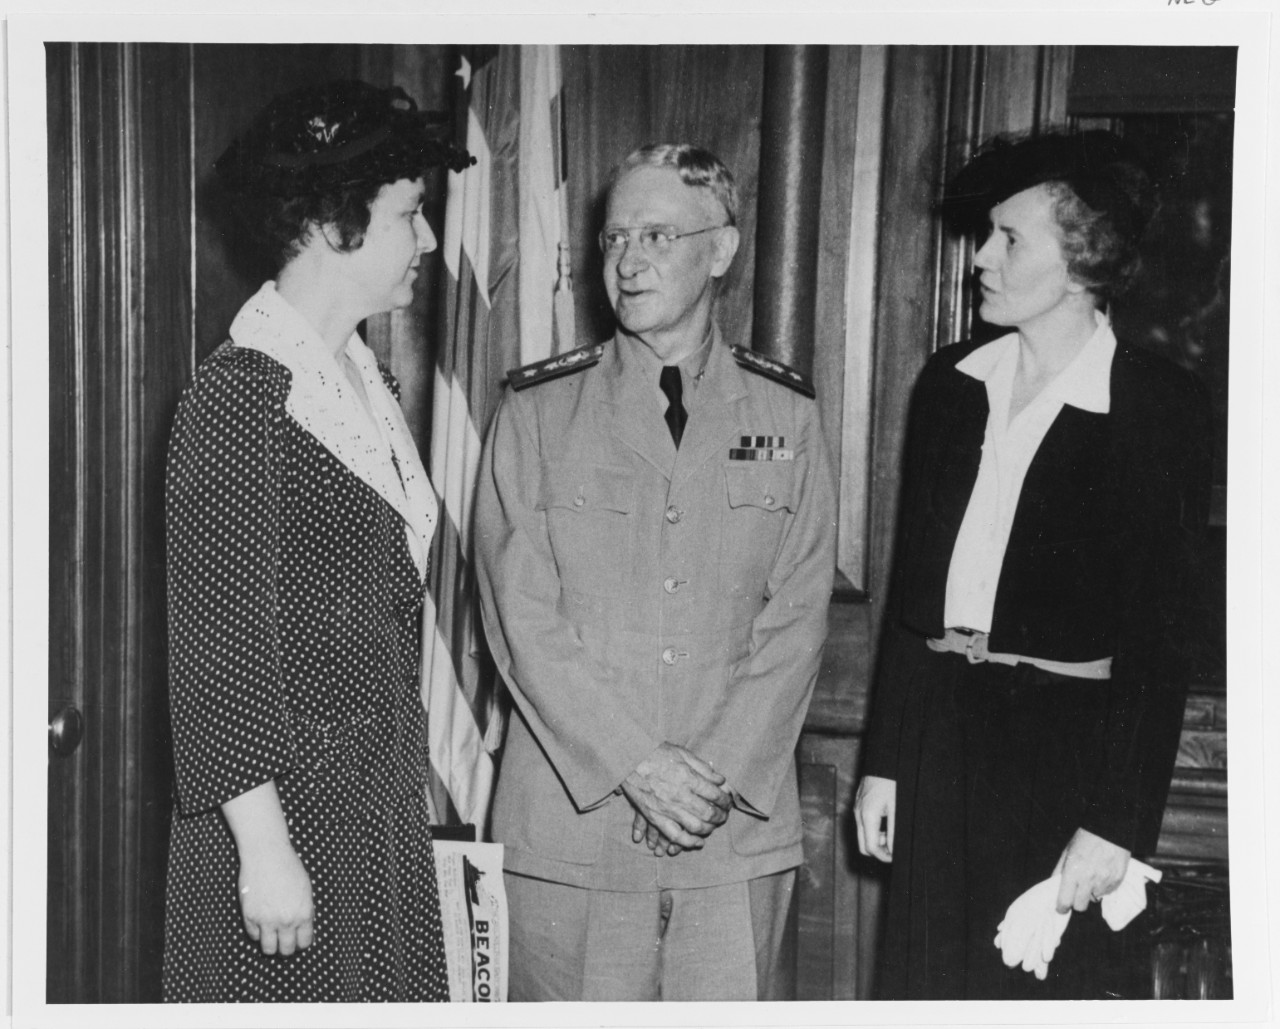 Photo #: 80-G-19517  Mildred H. McAfee (left) and Margaret O. Disert (right)